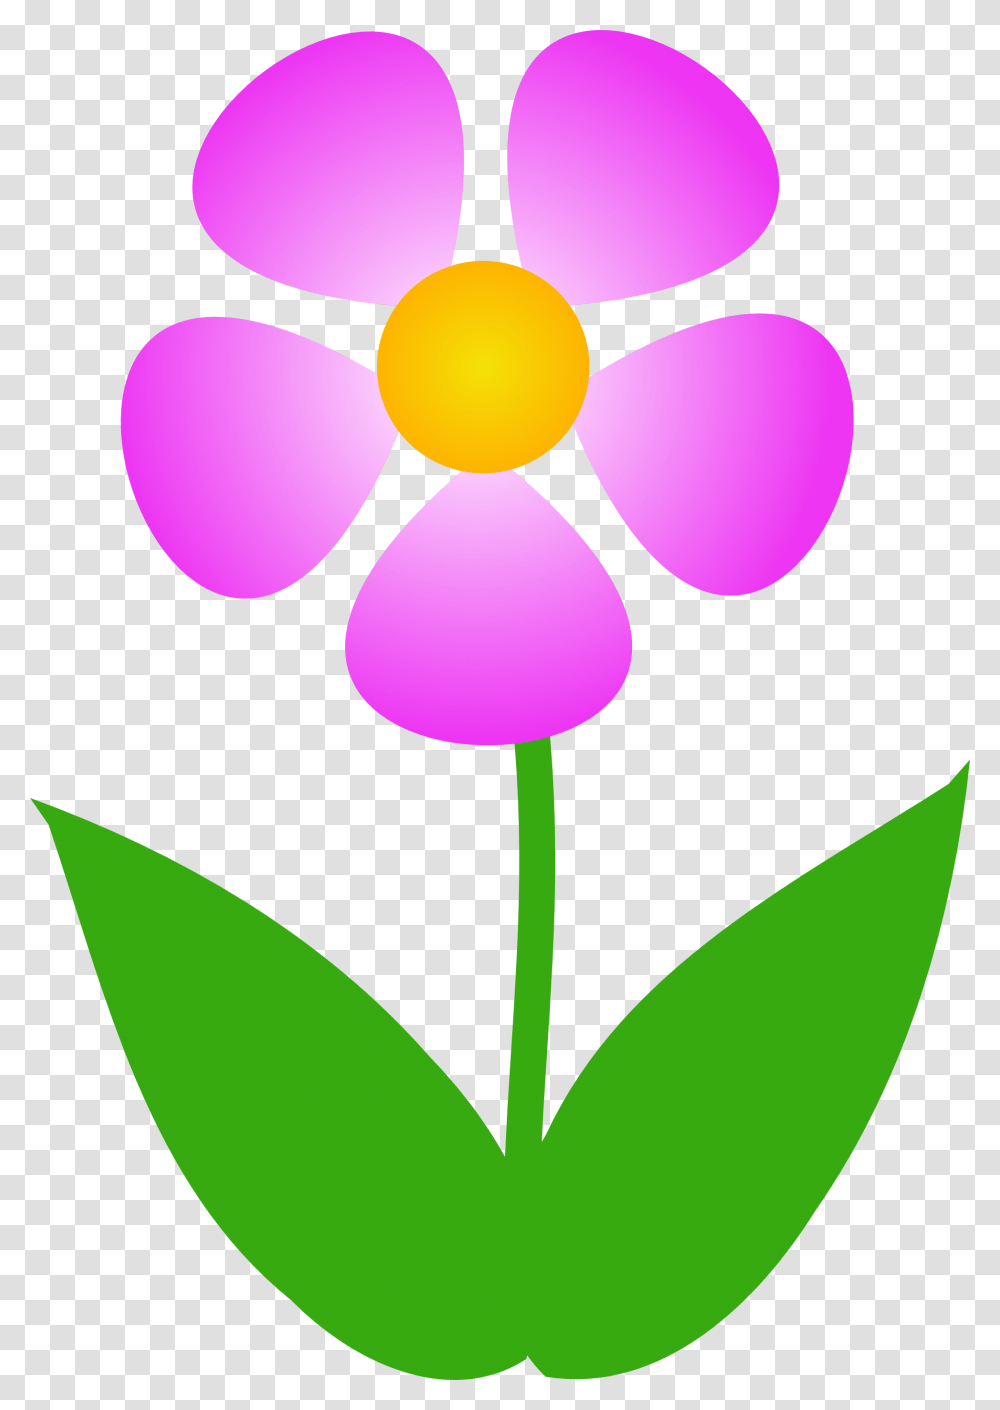 Free Clipart Images Of Flowers Flower Clip Art Pictures Image, Plant, Blossom, Balloon, Pattern Transparent Png